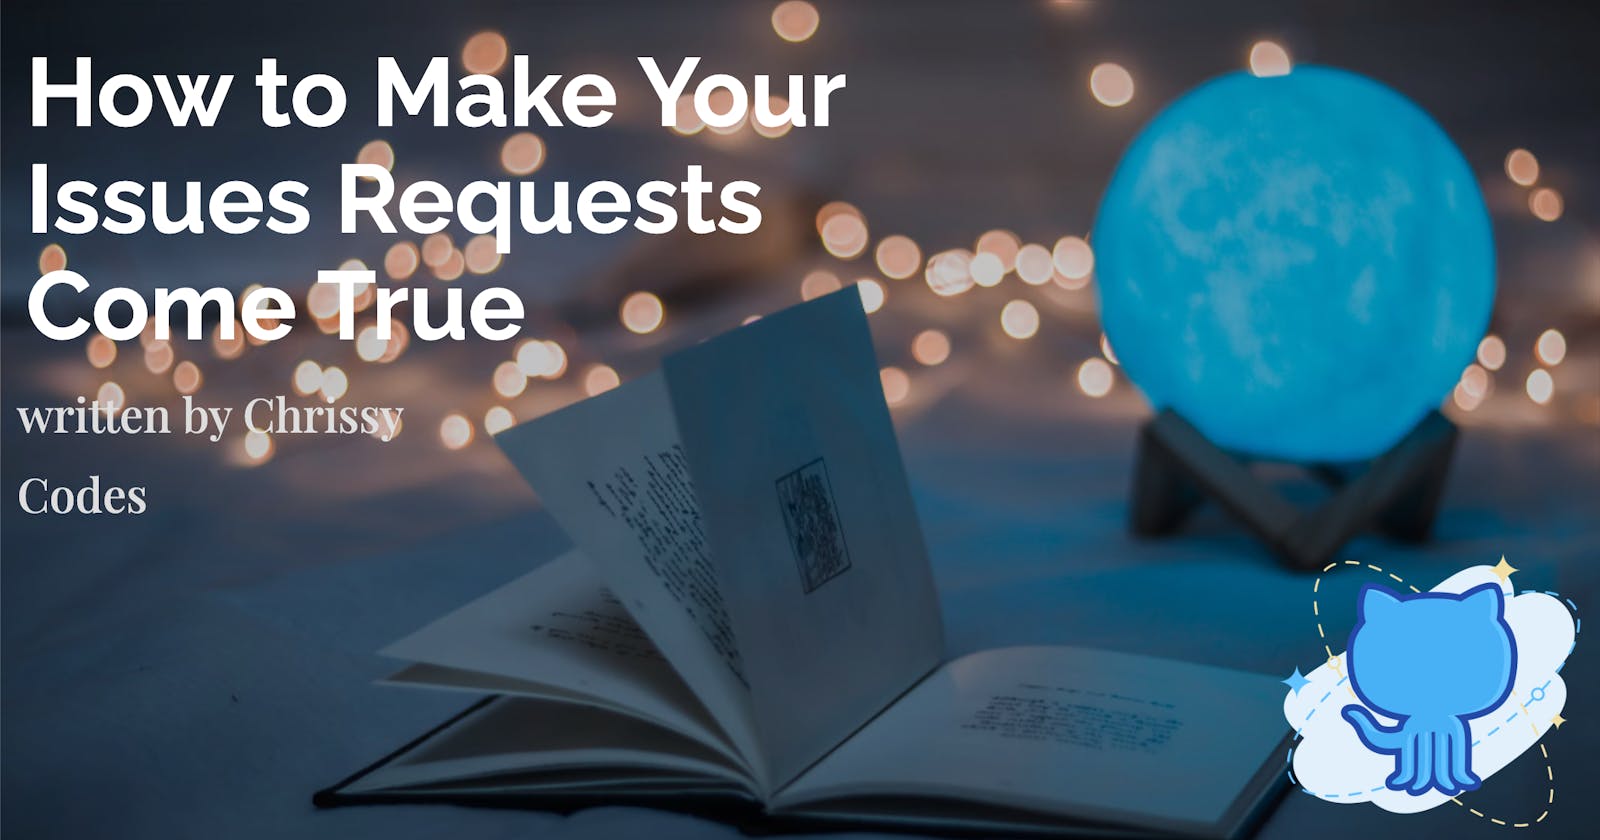 How to Make Your Issues Requests Come True